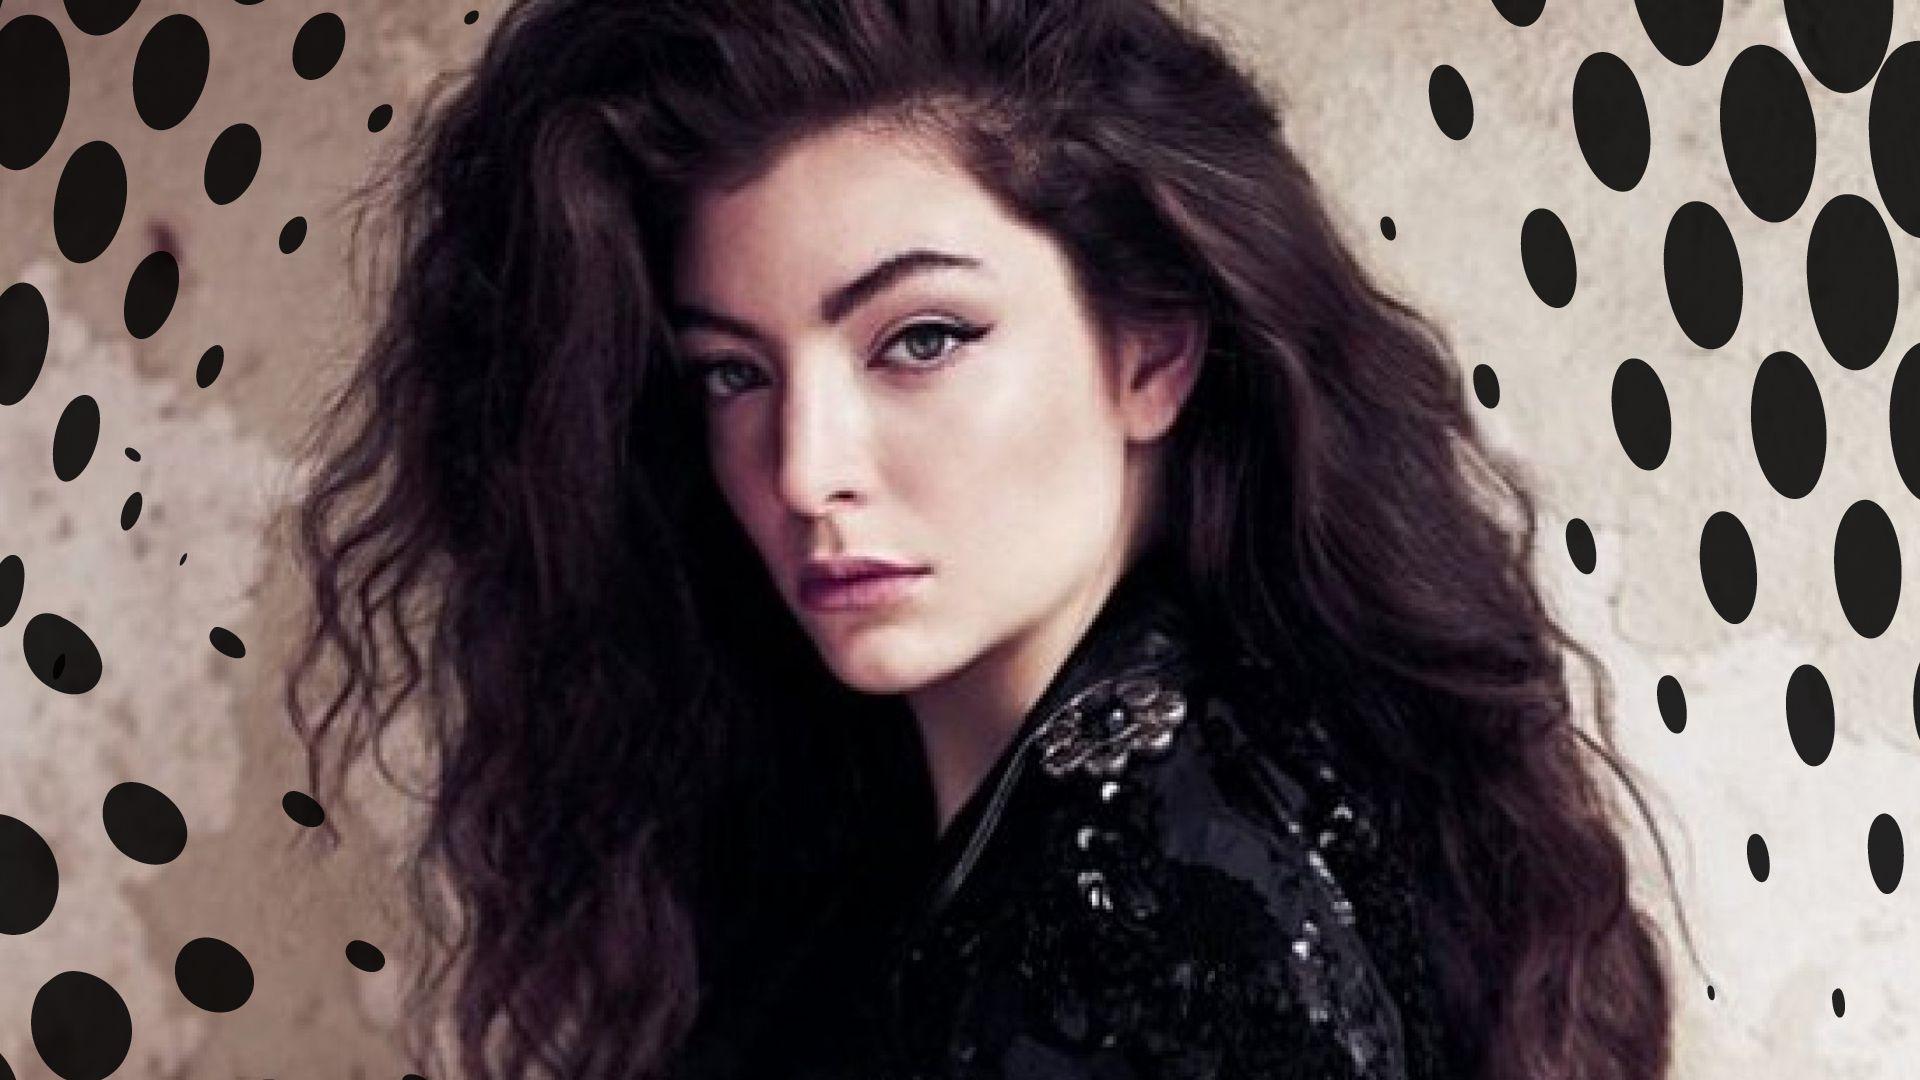 Lorde Wallpaper, Lorde Background for PC Cover Cool Photo